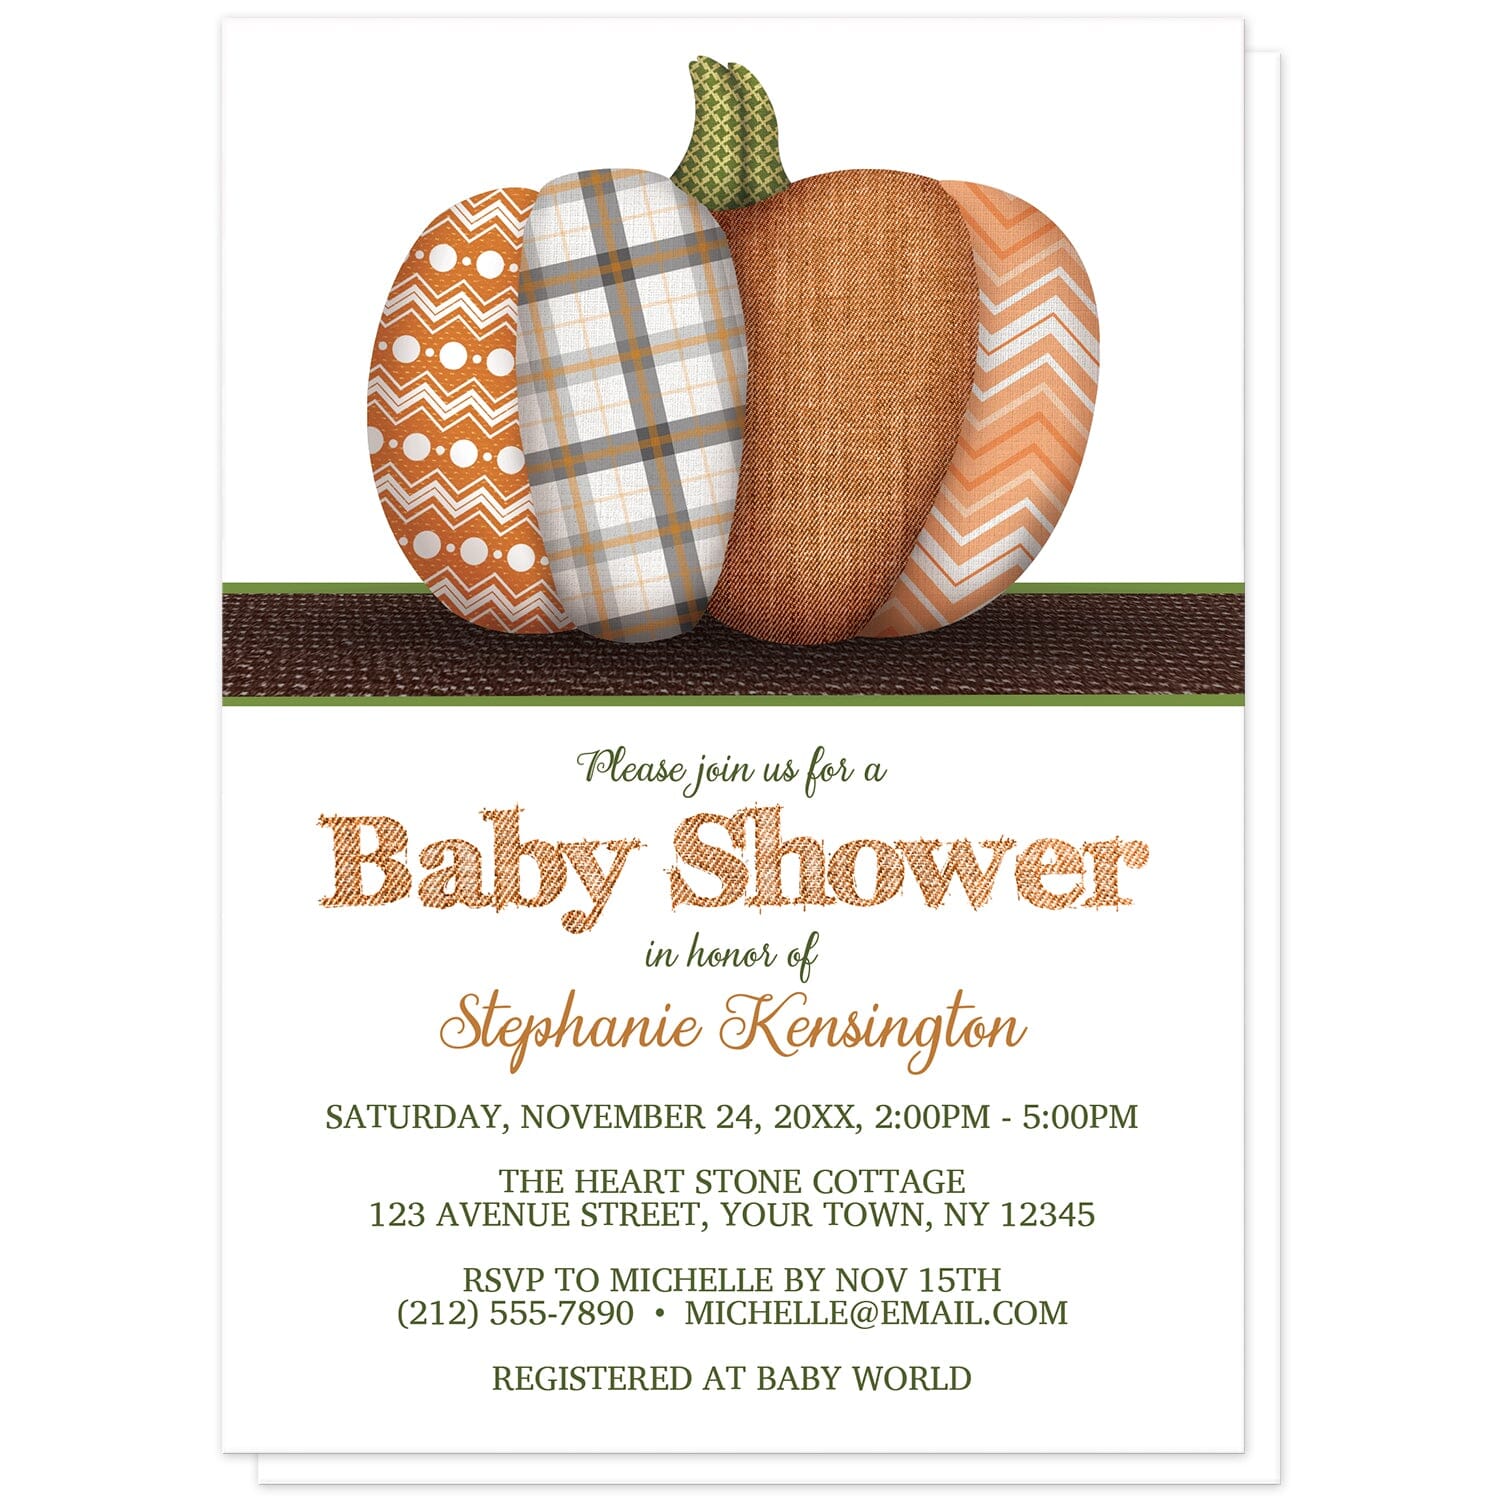 Patchwork Pumpkin Autumn Baby Shower Invitations at Artistically Invited. Rustic patchwork pumpkin autumn baby shower invitations with an illustration of a pumpkin divided into sections covered in patterns and textures designs, such as plaid, polka dots, chevron zigzags, and orange denim. 